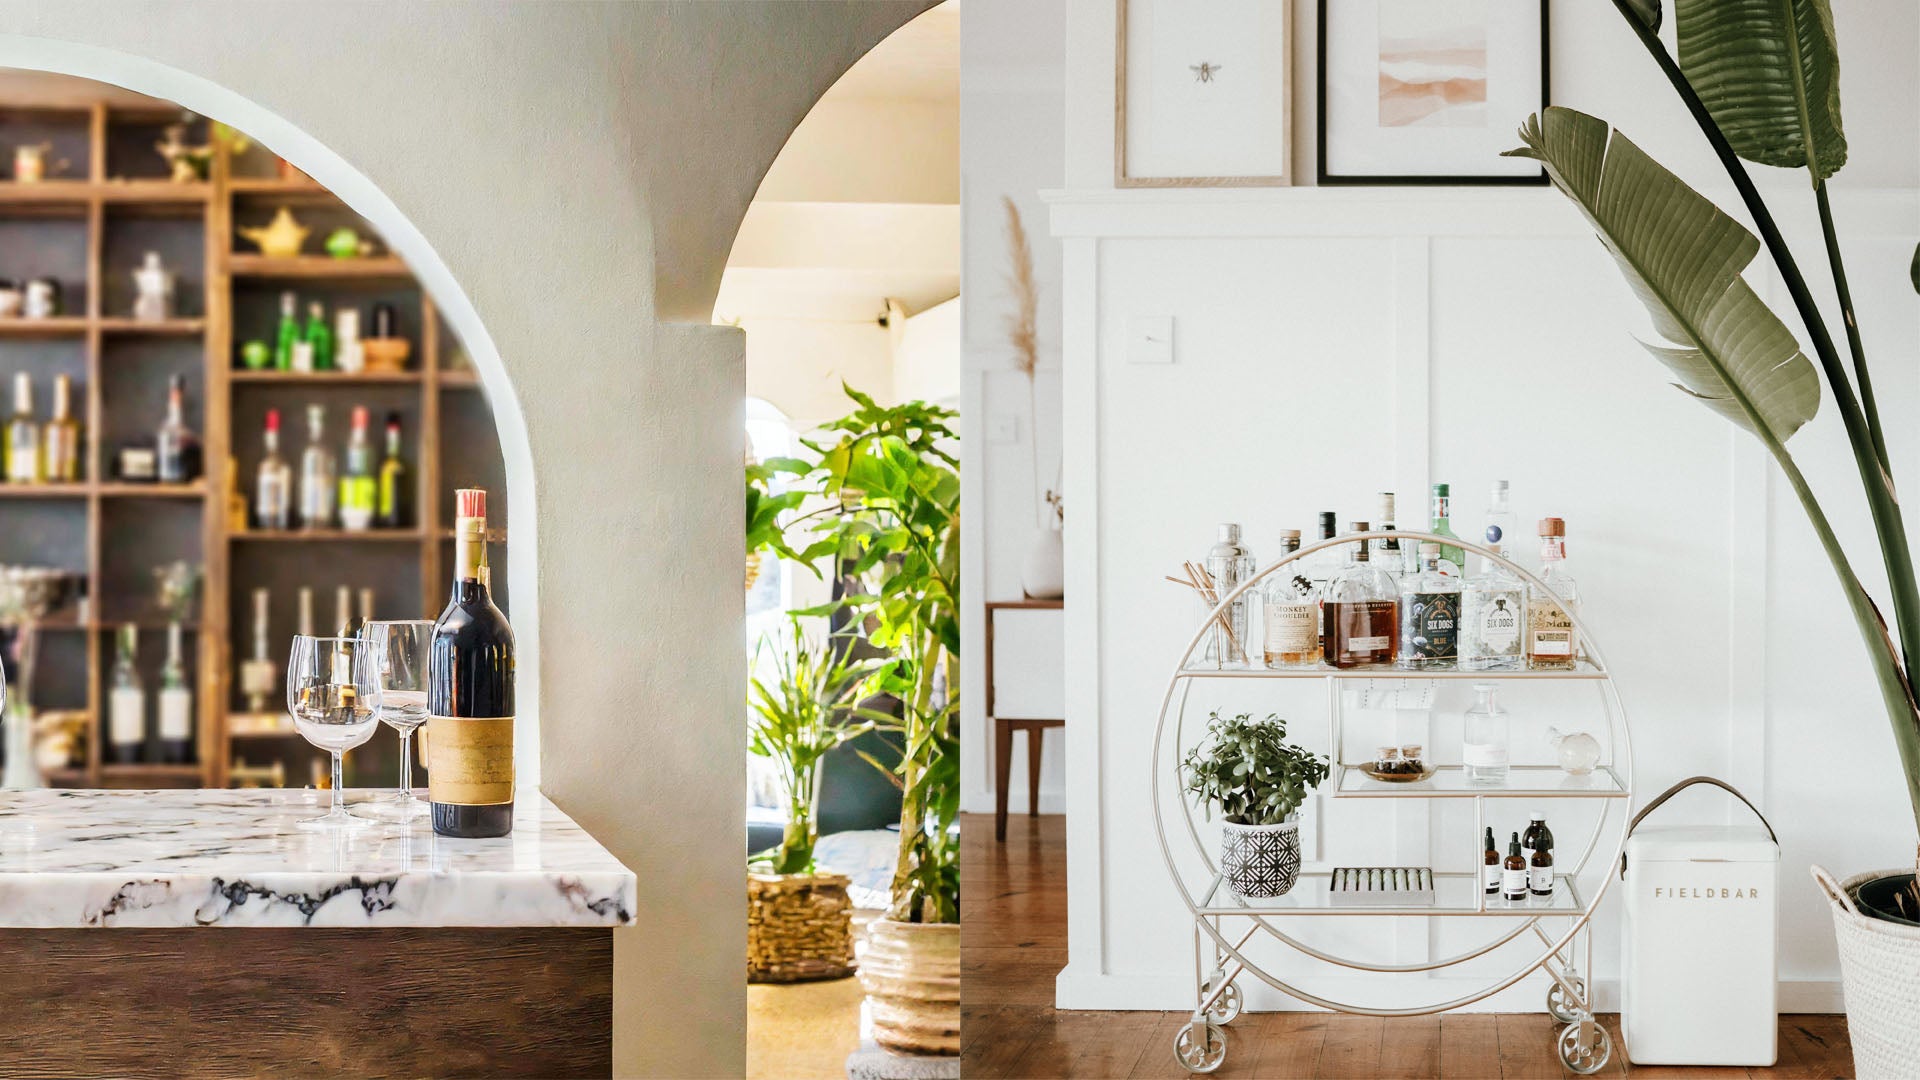 Home bar with wine bottle and glasses on marble counter with shelves in the background, contemporary bar cart with white board and batten wall.